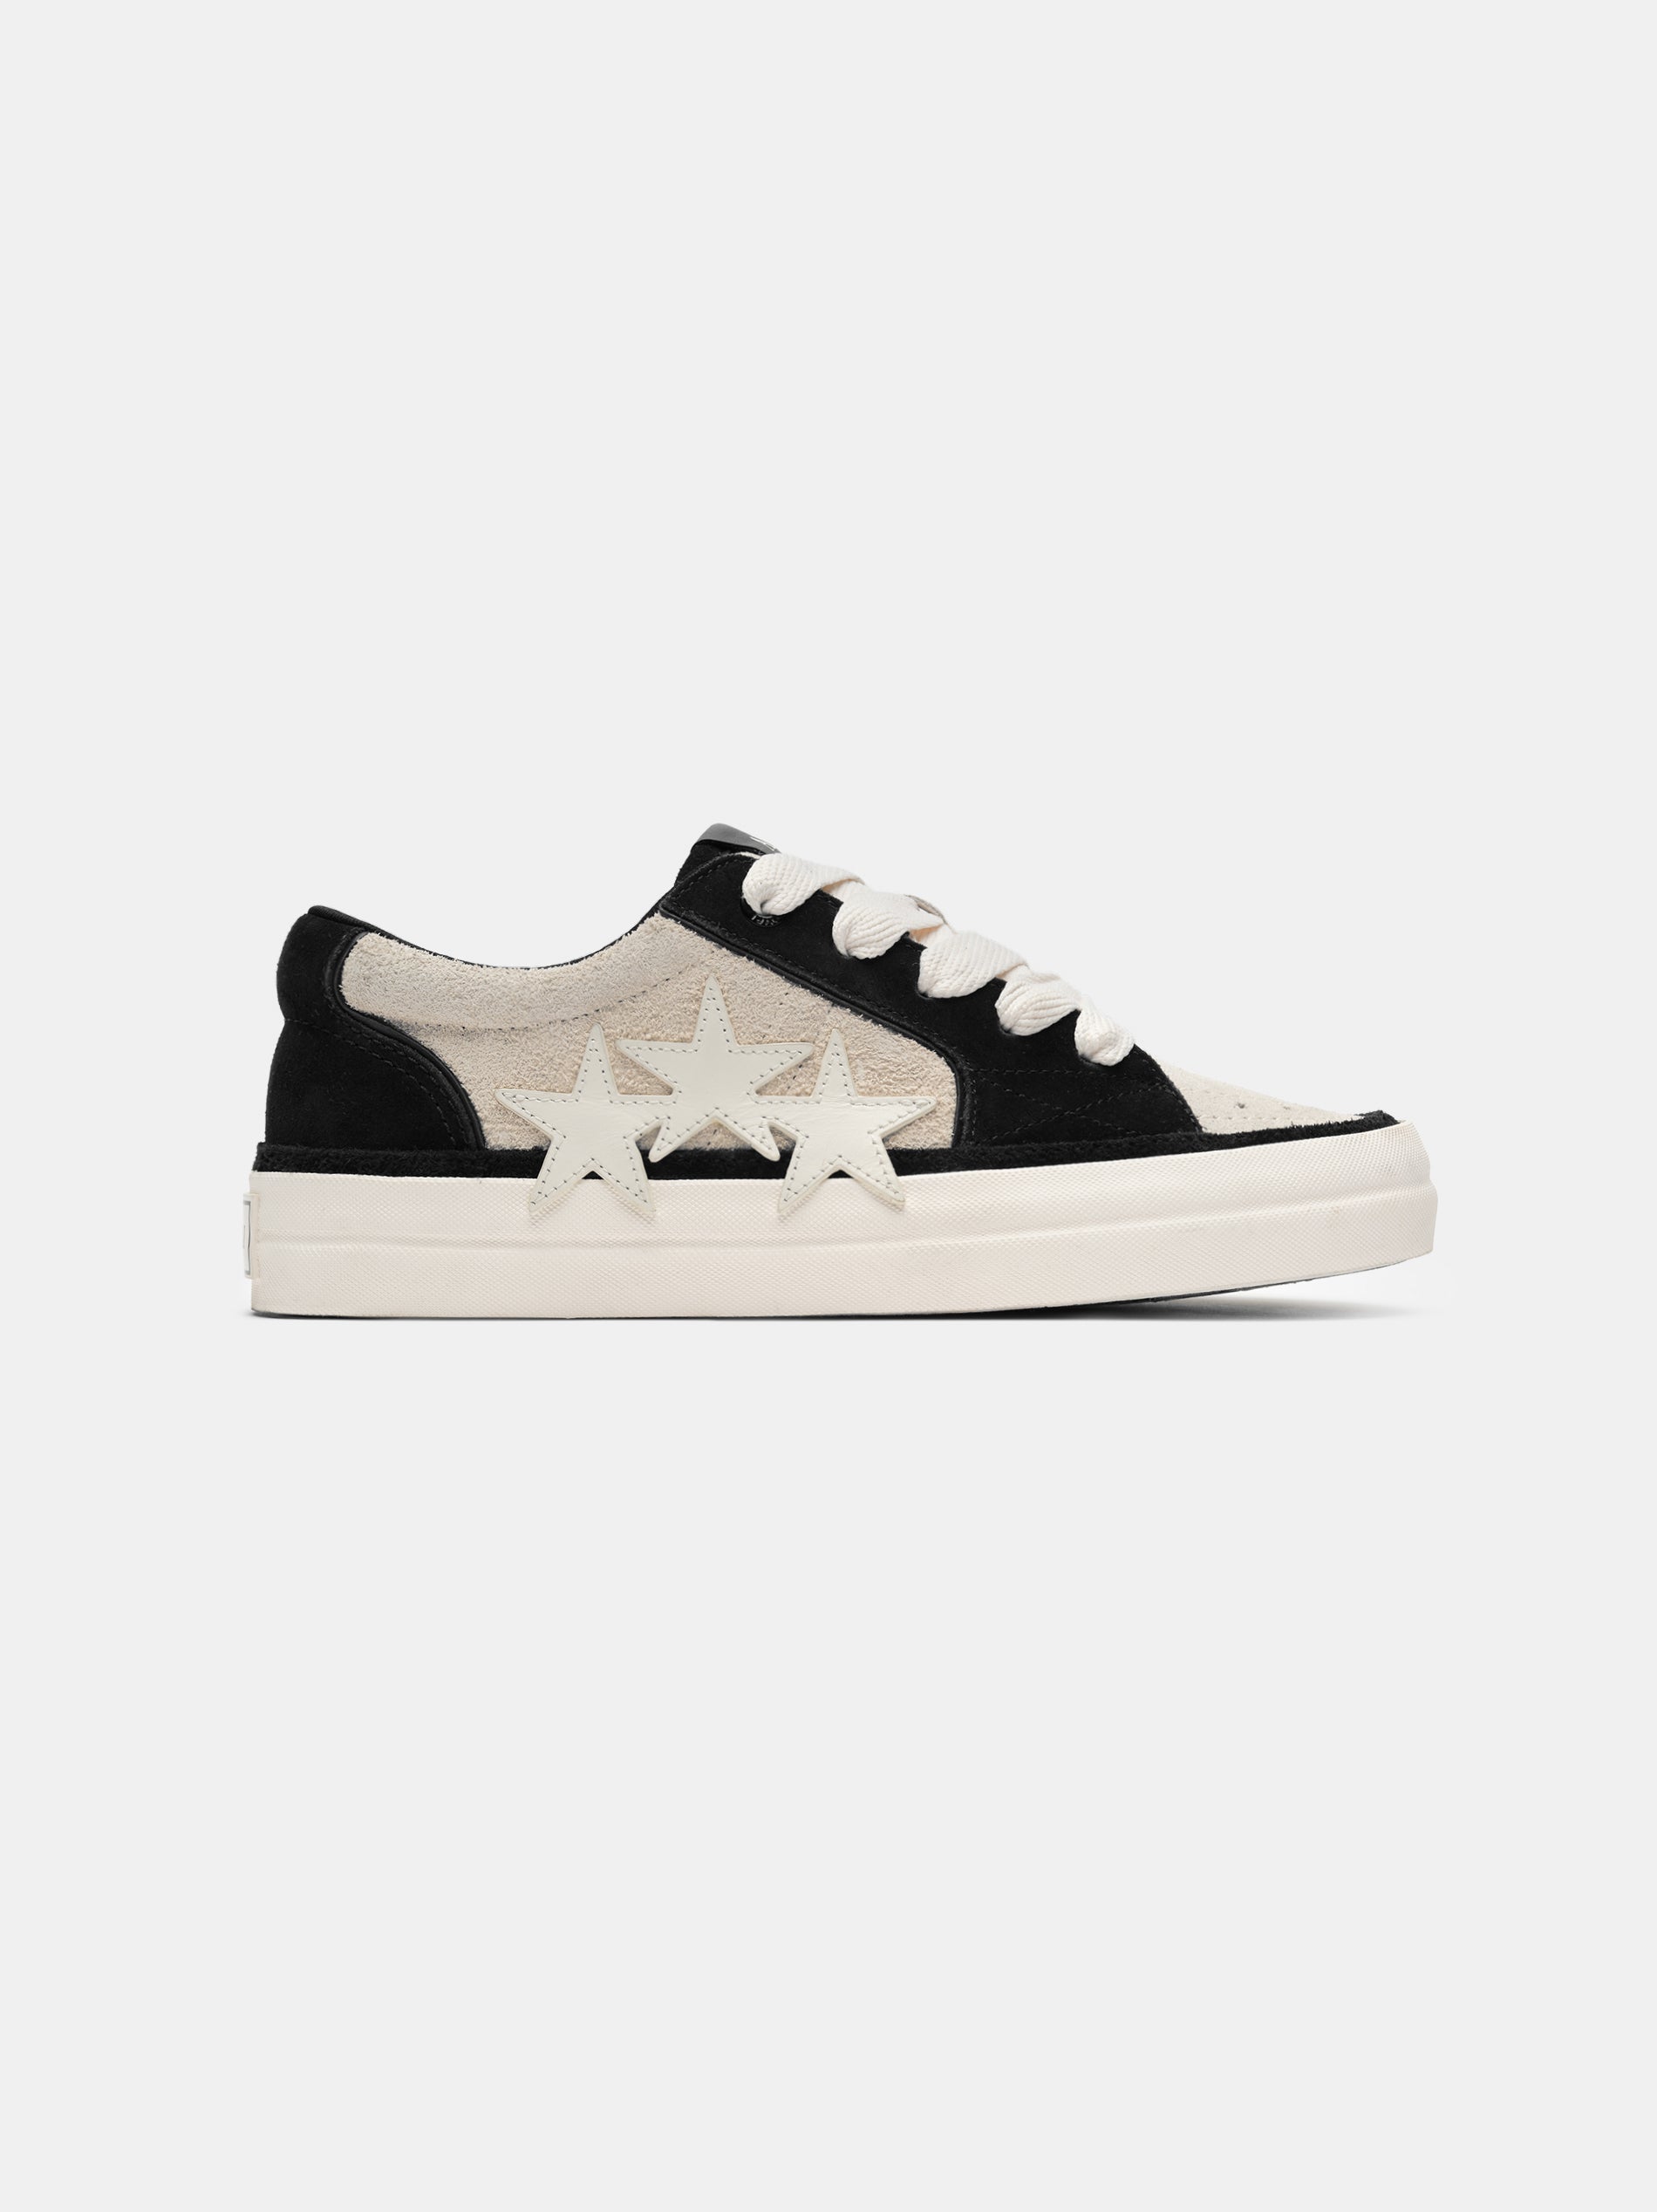 Product WOMEN - WOMEN'S SUNSET SKATE LOW - Birch Black featured image